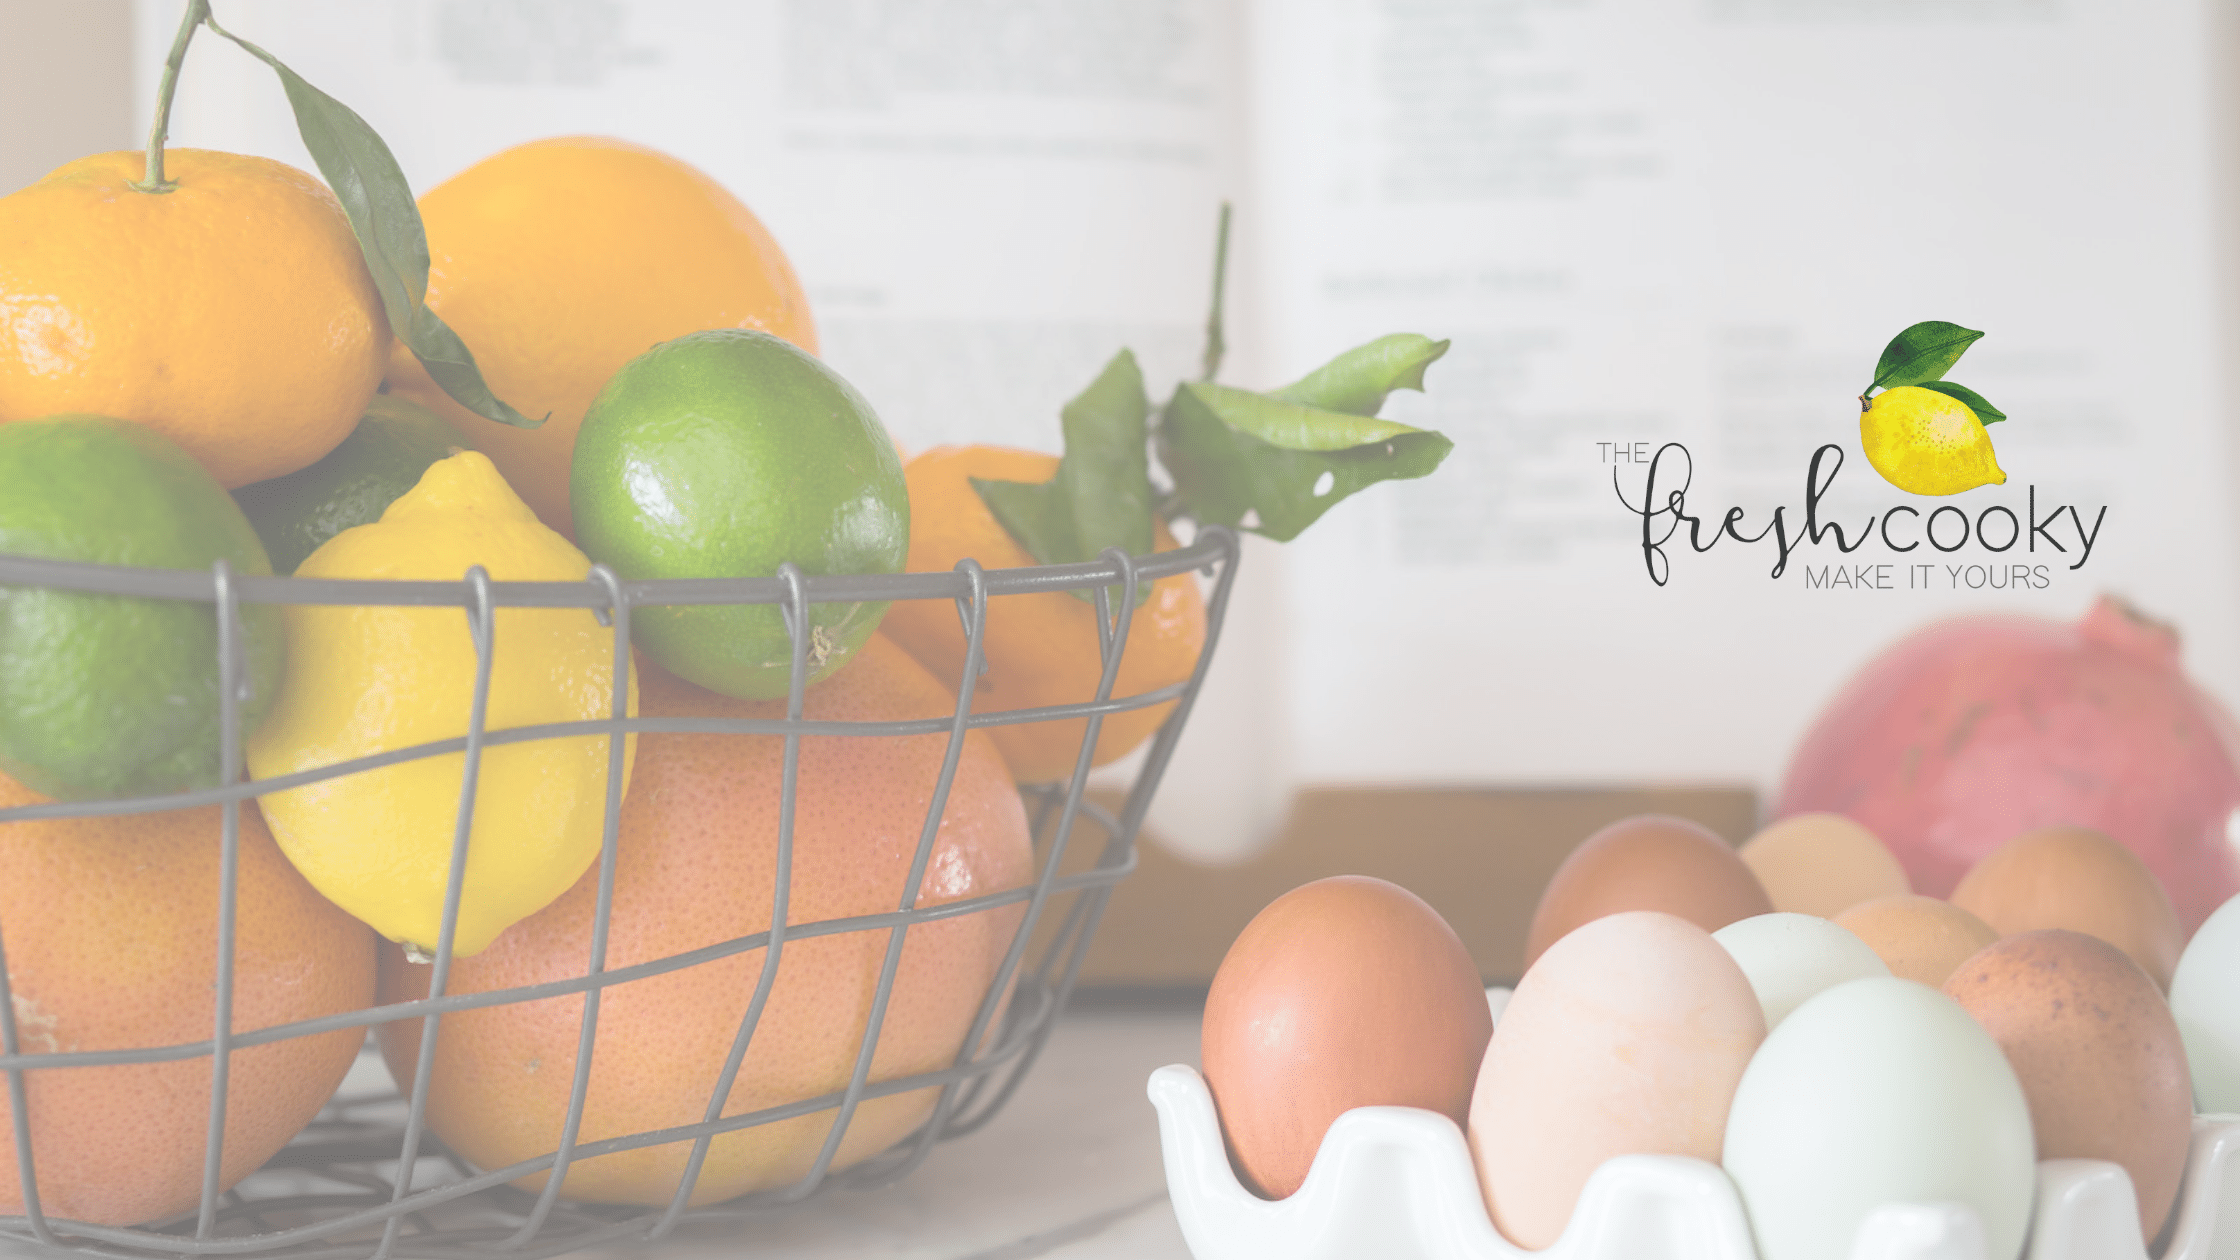 Banner for Media Kit with basket of fruit and carton of farmfresh eggs with logo for The Fresh Cooky.